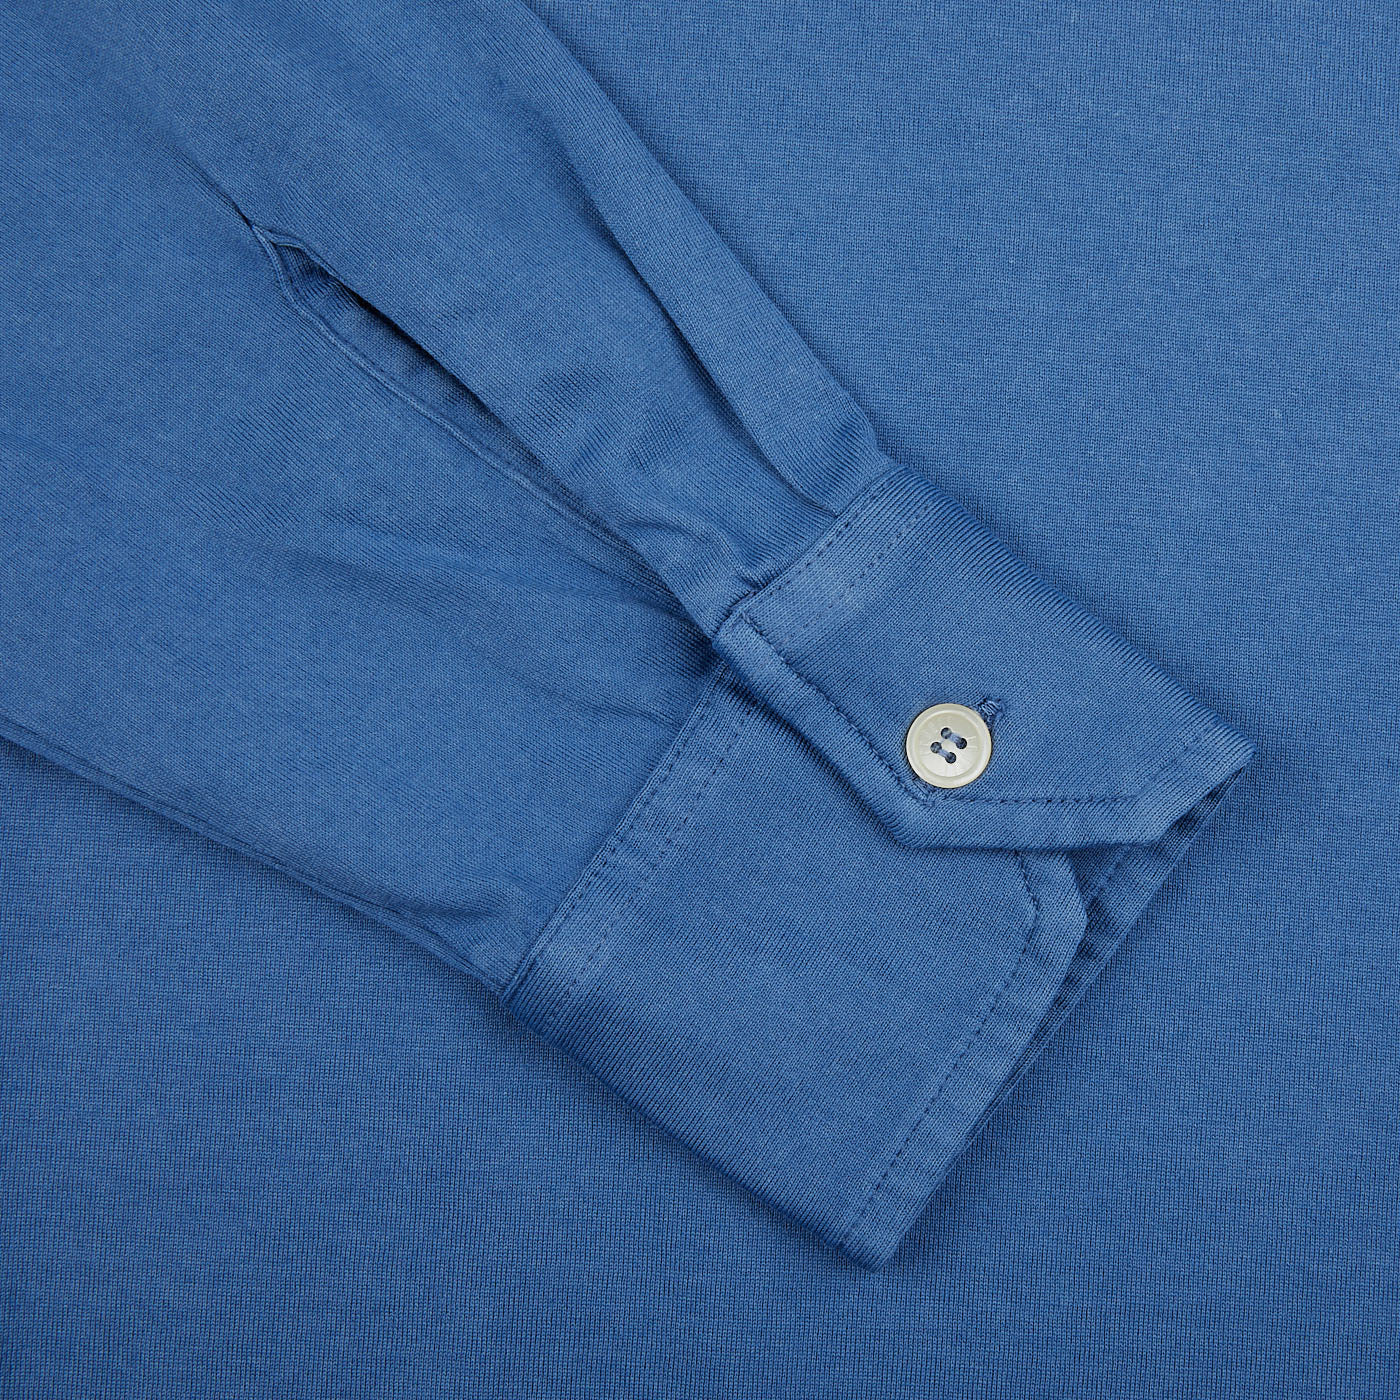 A close up of a Fedeli Light Blue Organic Cotton LS Polo Shirt with buttons.